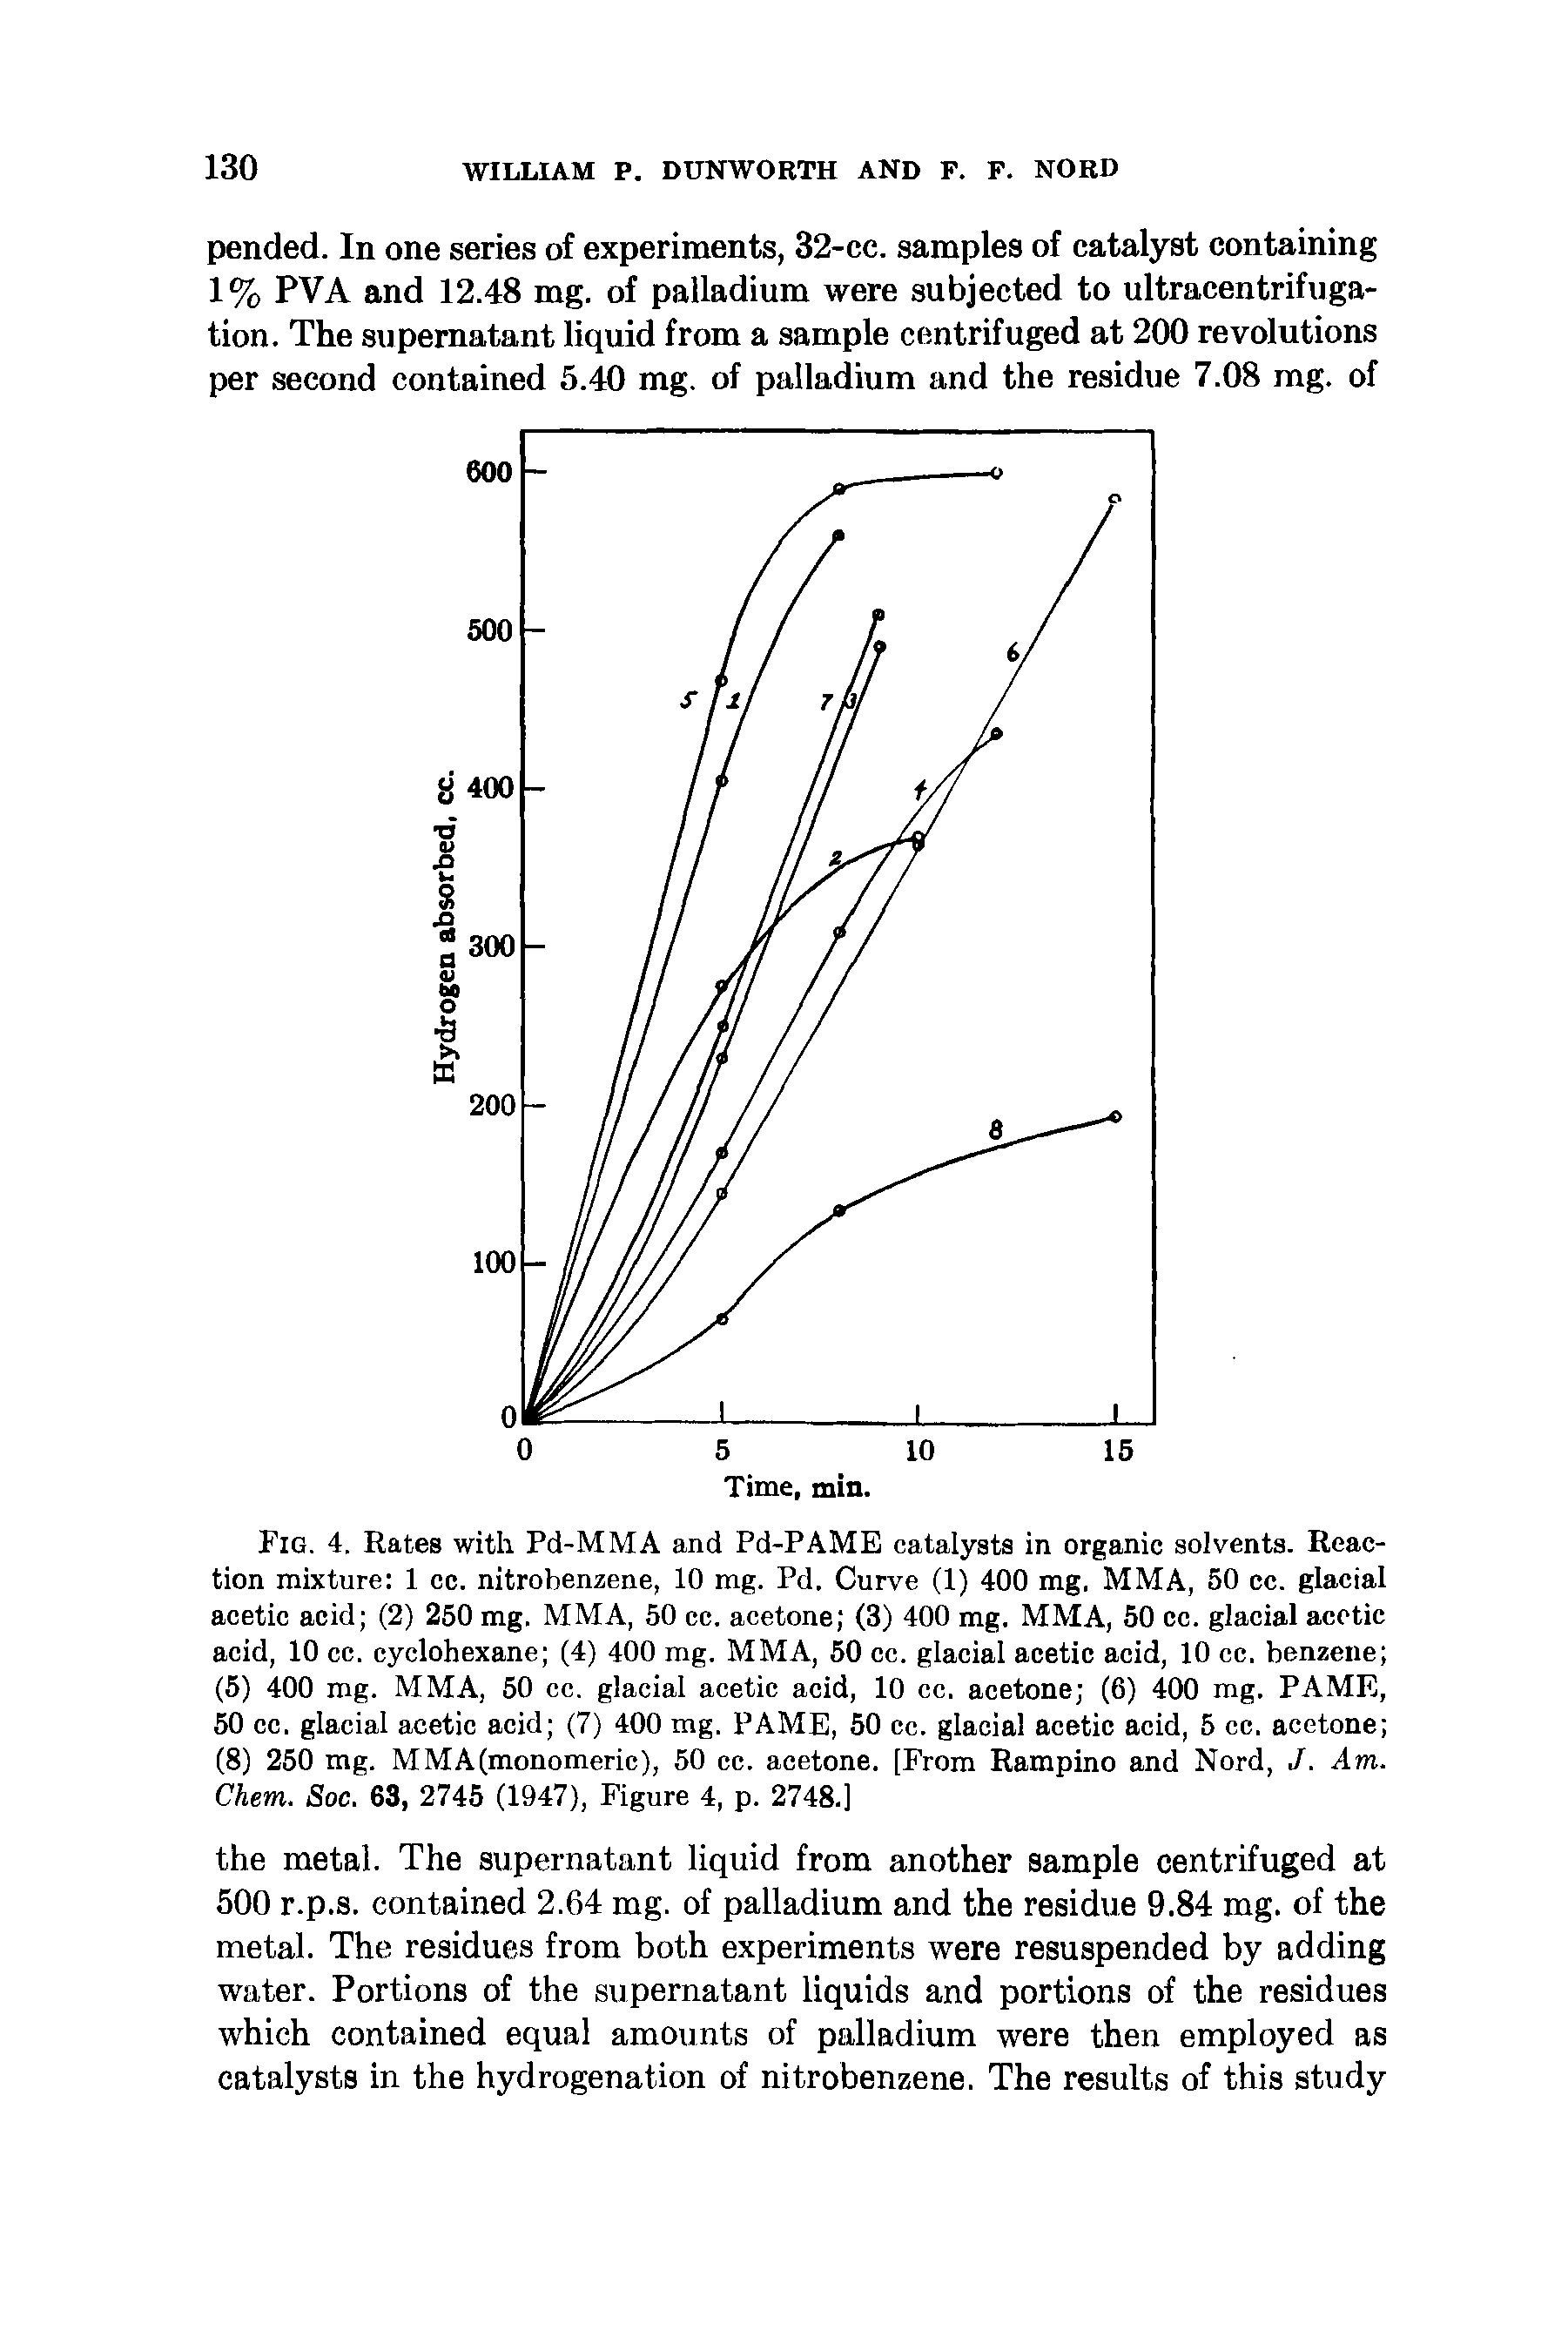 Fig. 4. Rates with Pd-MMA and Pd-PAME catalysts in organic solvents. Reaction mixture 1 cc. nitrobenzene, 10 mg. Pd. Curve (1) 400 mg, MMA, 50 cc. glacial acetic acid (2) 250 mg. MMA, 50 cc. acetone (3) 400 mg. MMA, 50 cc. glacial acetic acid, 10 cc. cyclohexane (4) 400 mg. MMA, 50 cc. glacial acetic acid, 10 cc. benzene (5) 400 mg. MMA, 50 cc. glacial acetic acid, 10 cc. acetone (6) 400 mg. PAME, 50 cc. glacial acetic acid (7) 400 mg. PAME, 50 cc. glacial acetic acid, 5 cc. acetone (8) 250 mg. MMA(monomeric), 50 cc. acetone. [From Rampino and Nord, J. Am. Chem. Soc. 63, 2745 (1947), Figure 4, p. 2748.]...